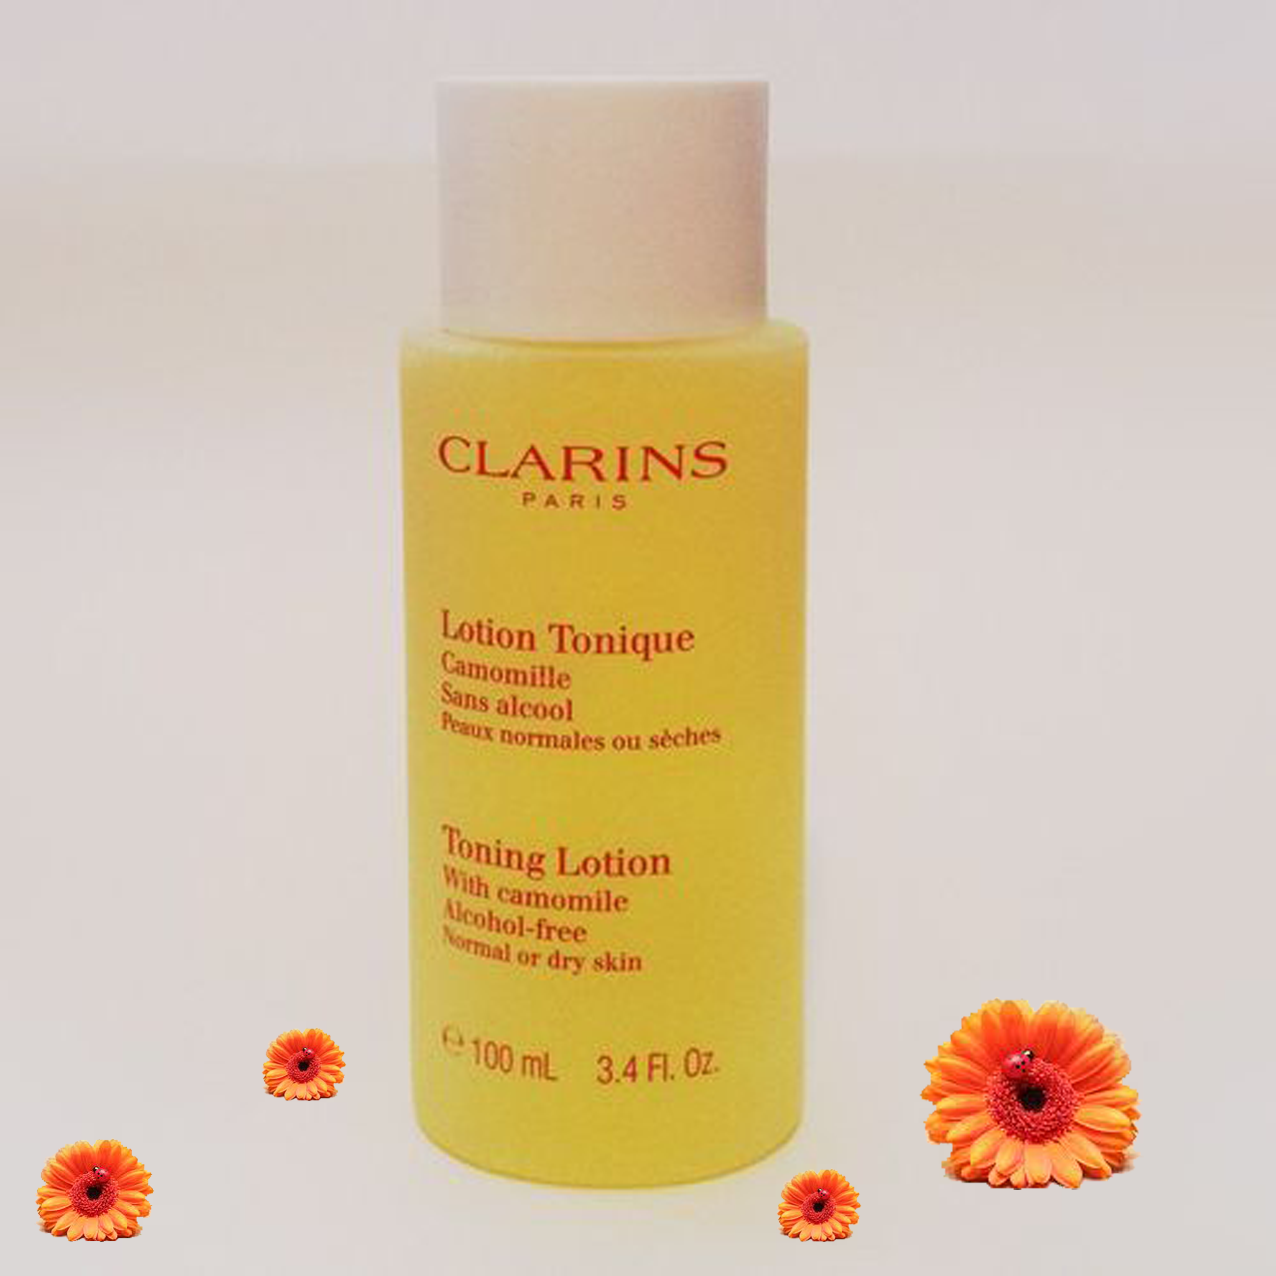 CLARINS,Lotion Tonique Toning Lotion With Camomile Alcohol-free Normal or dry skin 100 ml,Lotion Tonique Toning Lotion With Camomile Alcohol-free Normal or dry skin ราคา,Lotion Tonique Toning Lotion With Camomile Alcohol-free Normal or dry skin รีวิว